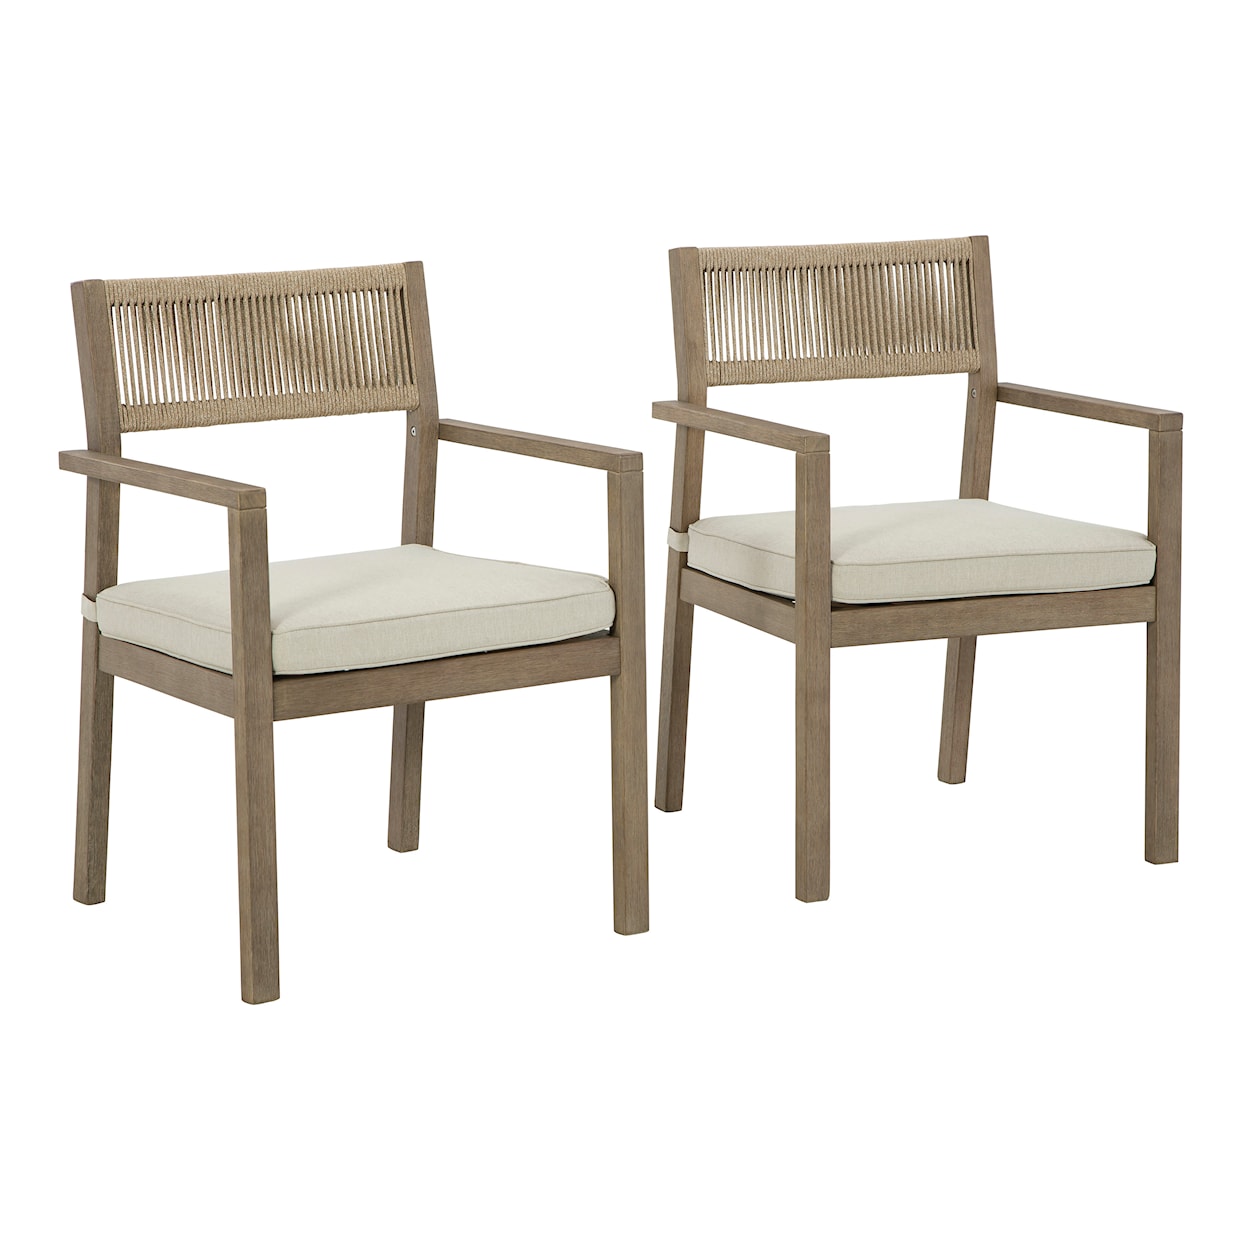 Signature Design by Ashley Aria Plains Arm Chair with Cushion (Set of 2)